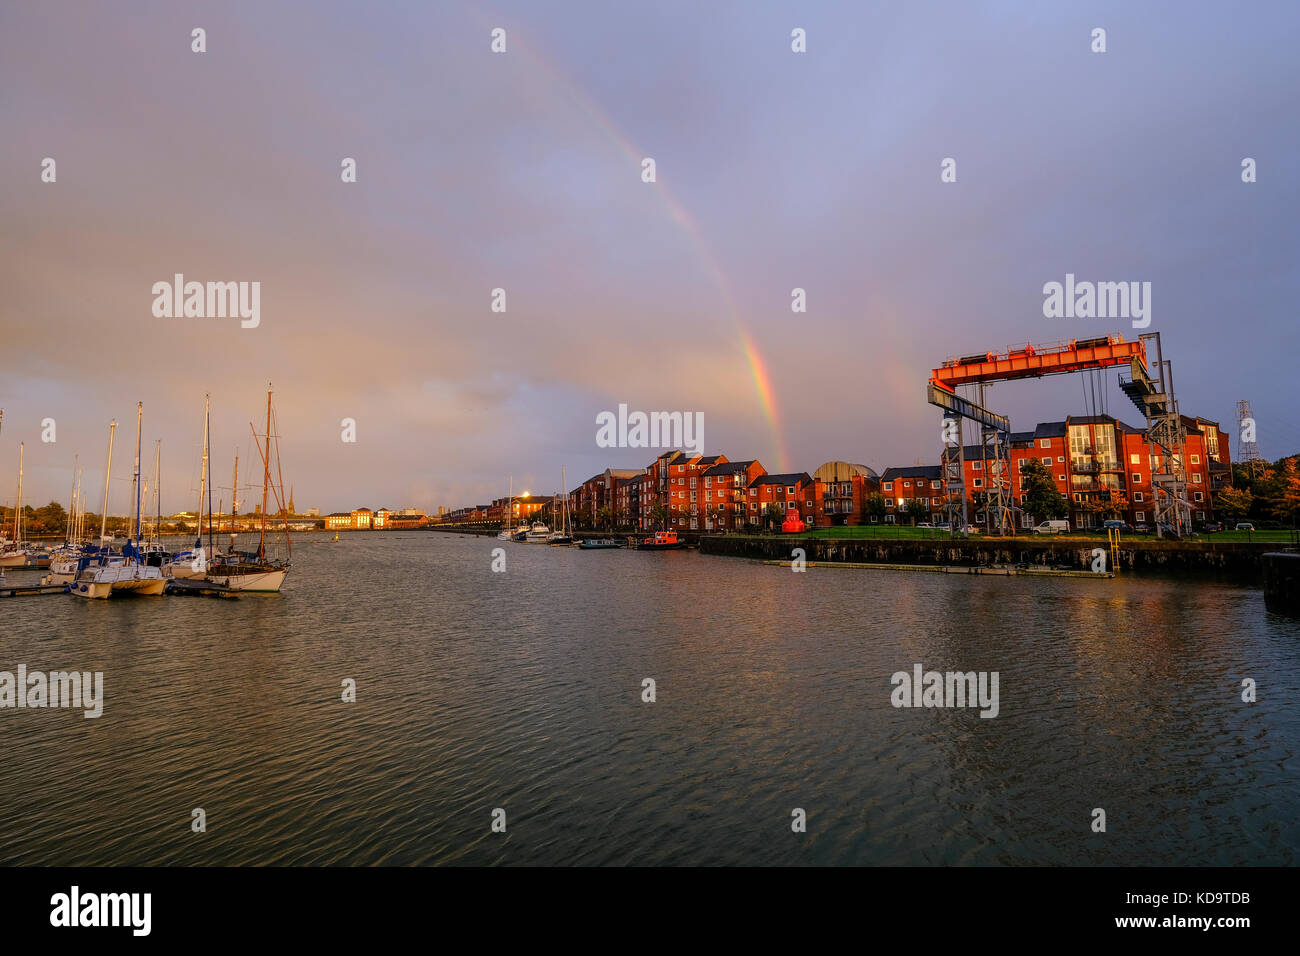 Preston, UK. 11th October 2017. UK Weather. After a wet day in Lancashire, the sun appeared briefly before sunset, creating a rainbow over Preston's Albert Dock.  The dock celbrated its 125th birthday this year and when built was the largest single dock in Europe. Credit: Paul Melling/Alamy Live News Stock Photo